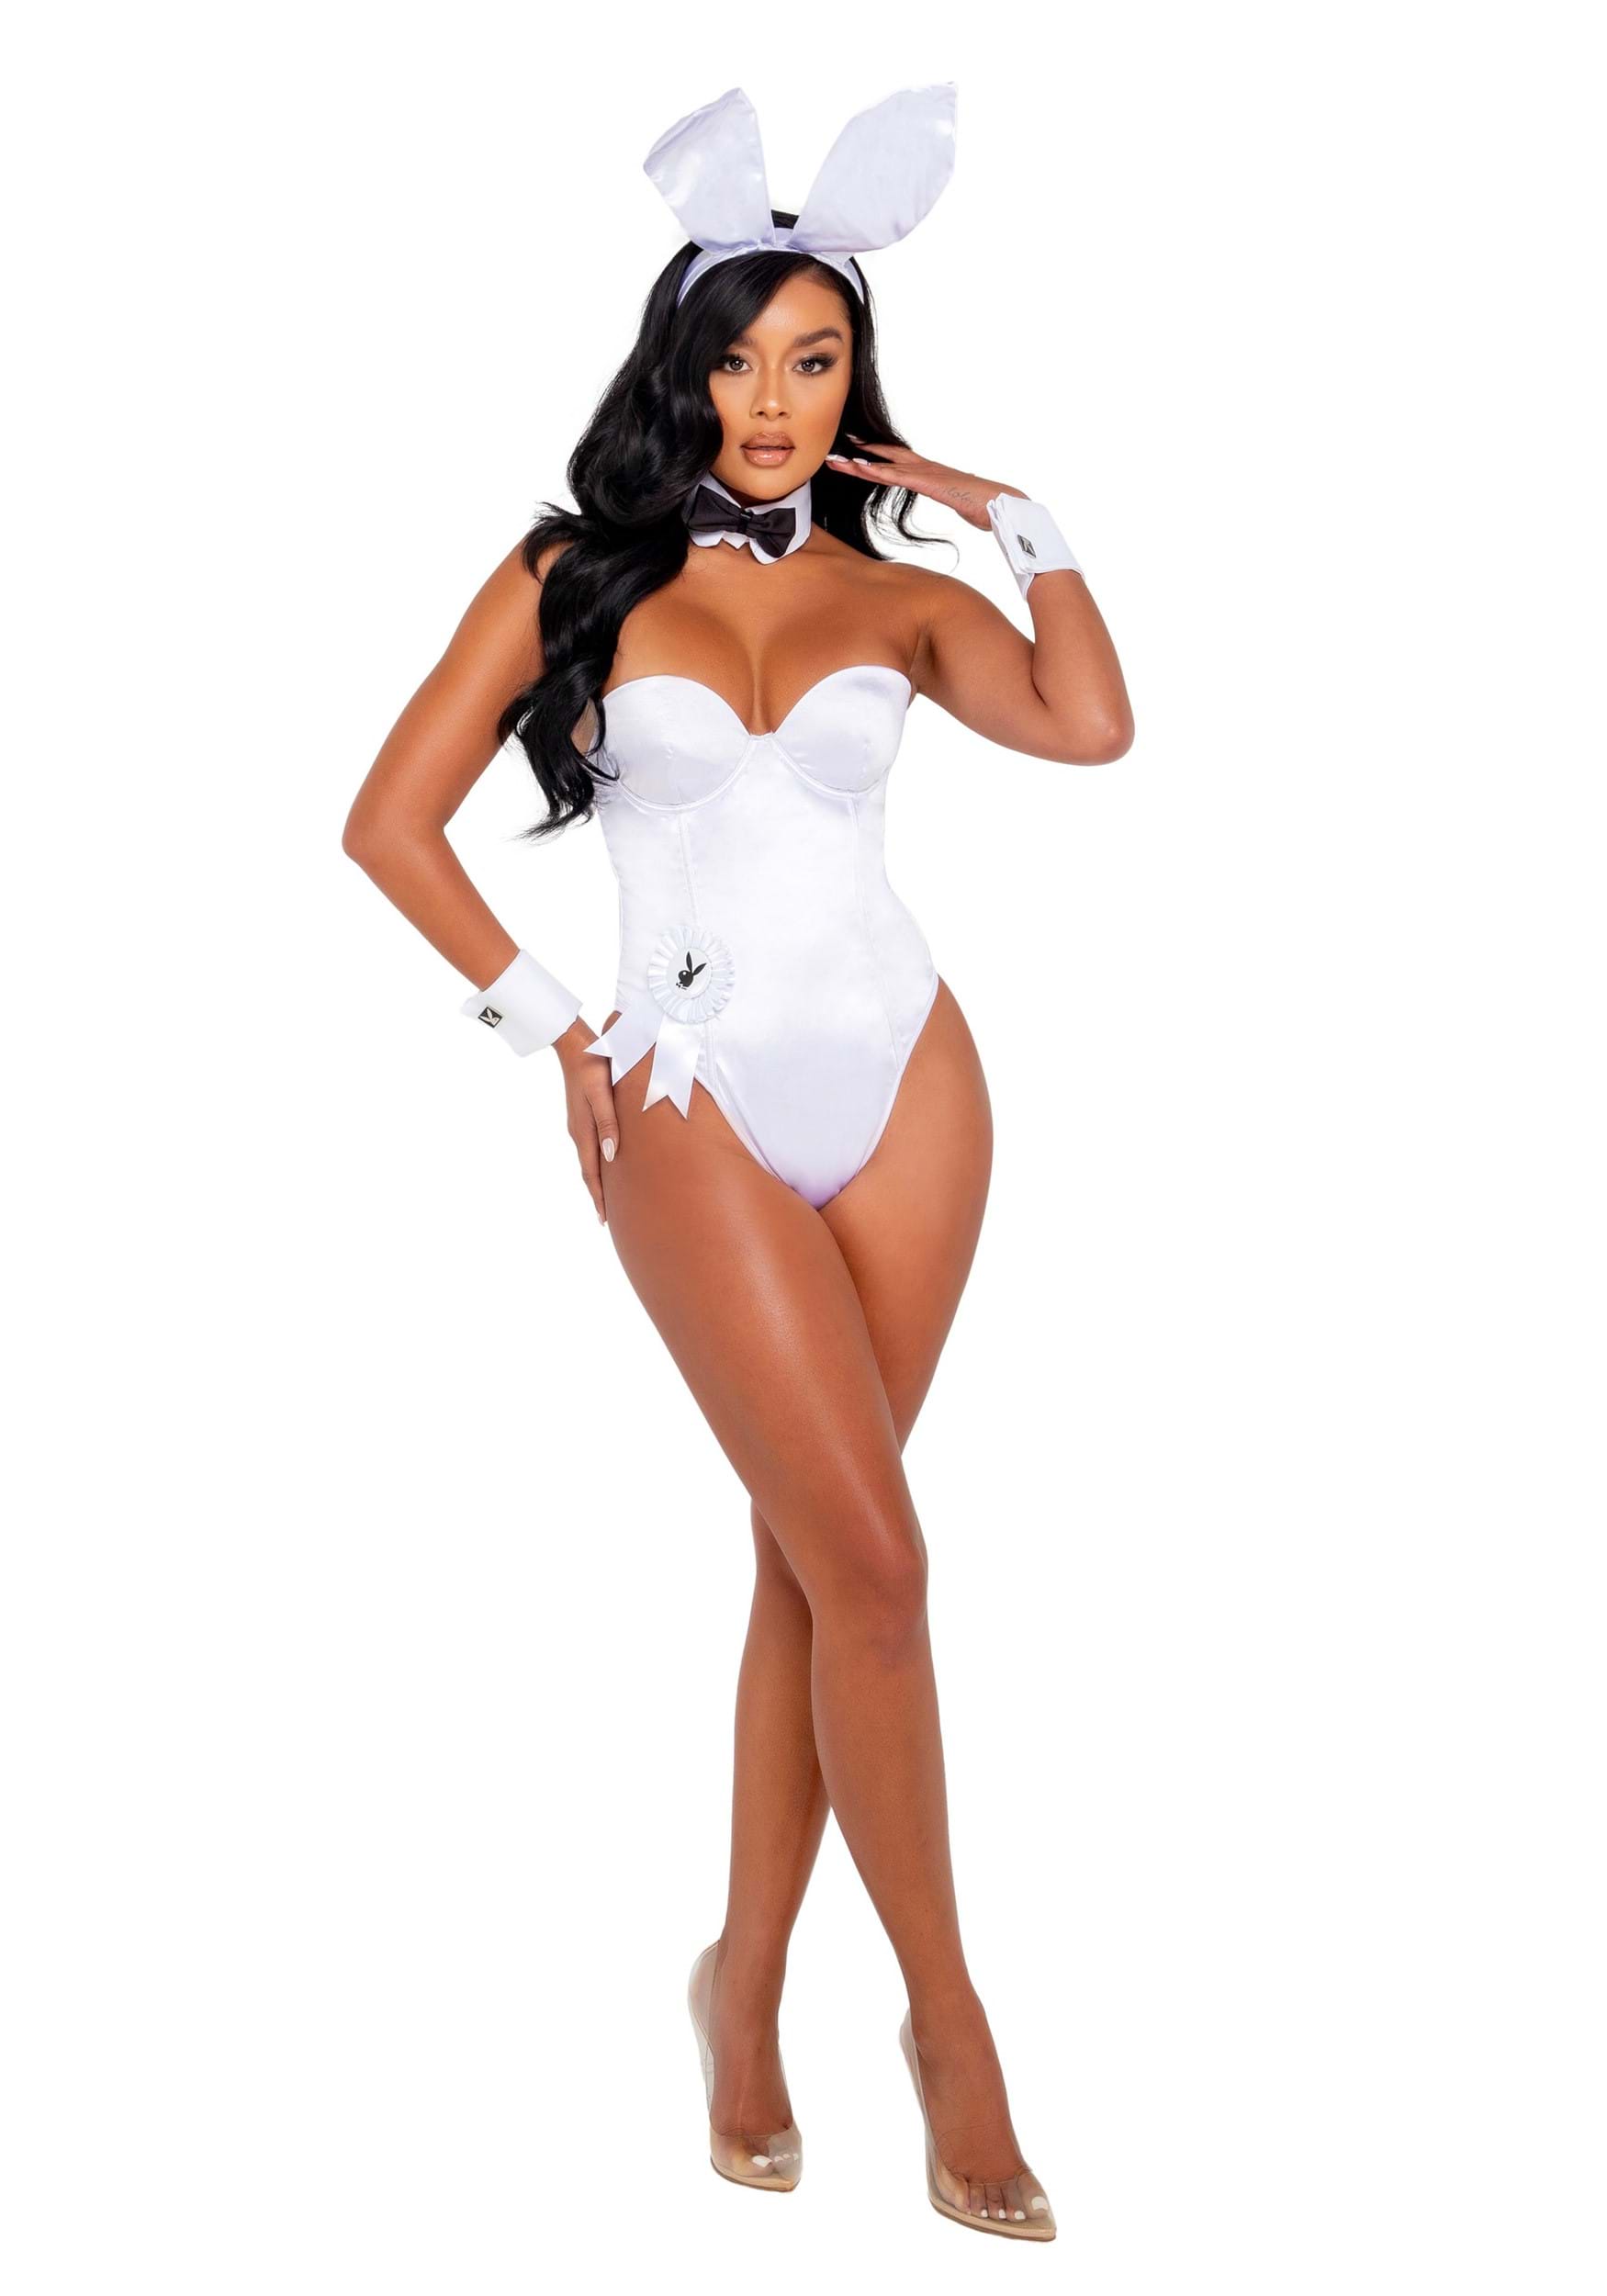 Photos - Fancy Dress Roma Playboy White Bunny Costume for women | Playboy Costumes White ROPB12 